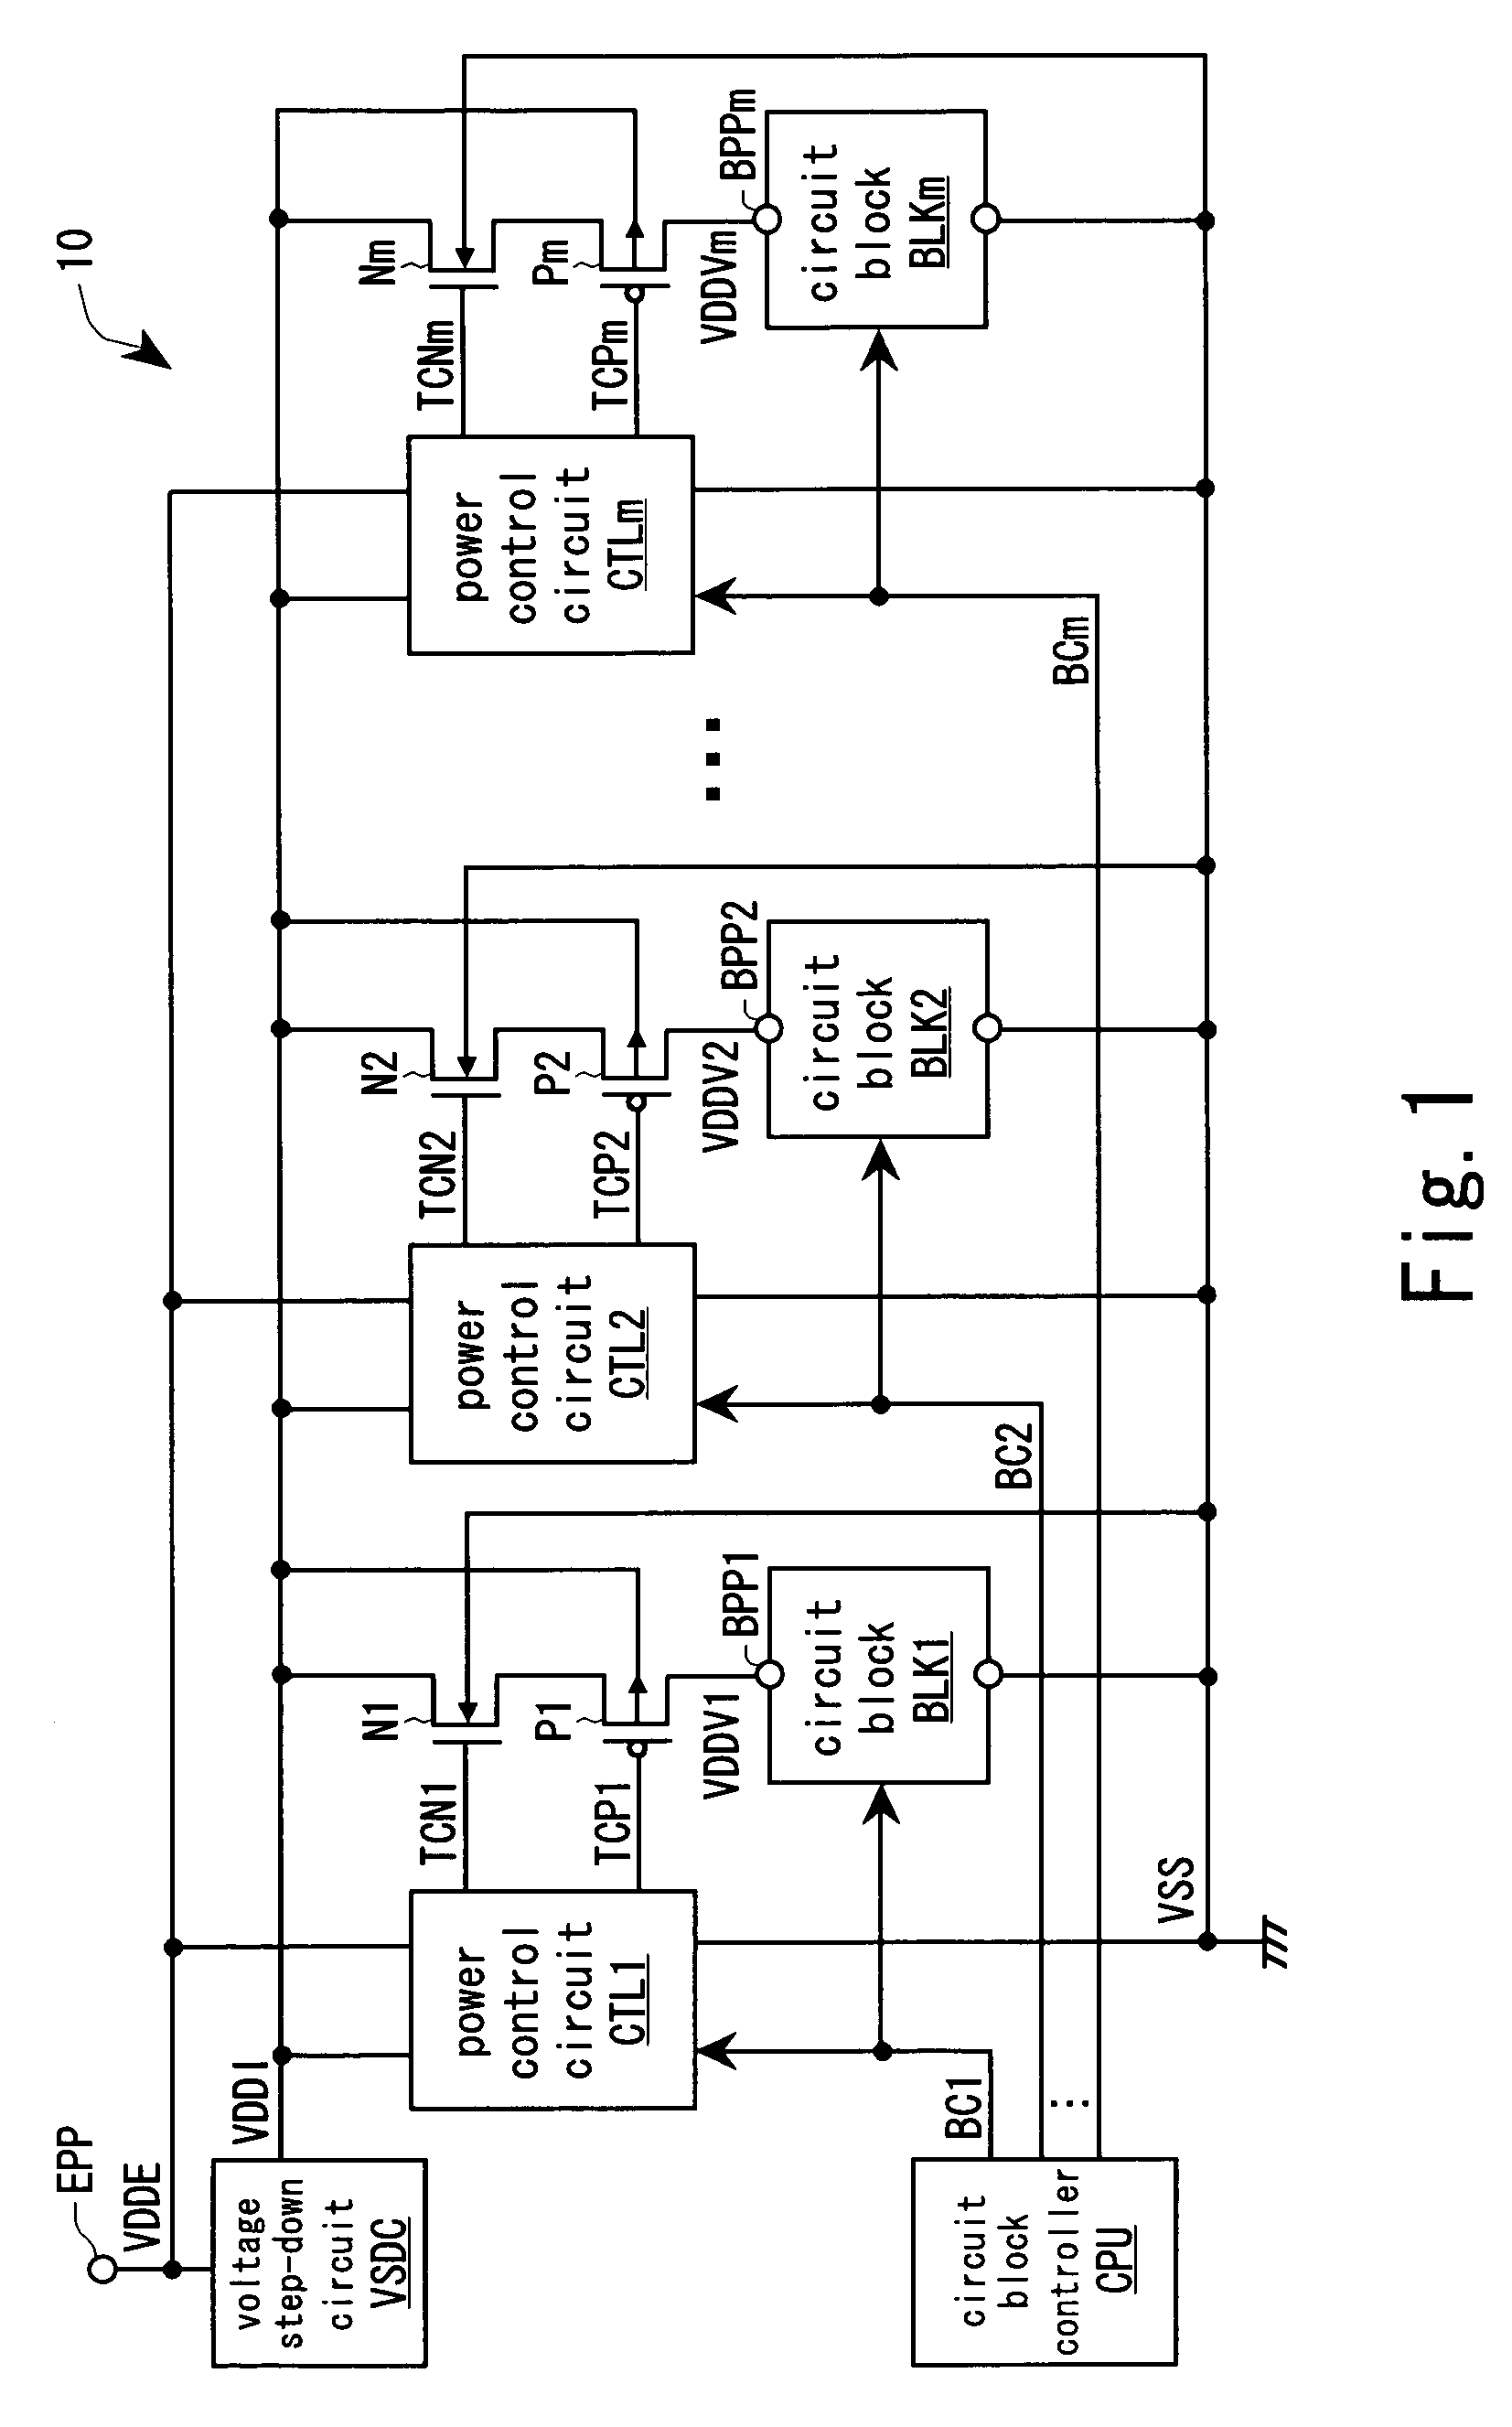 Power control circuit with reduced power consumption